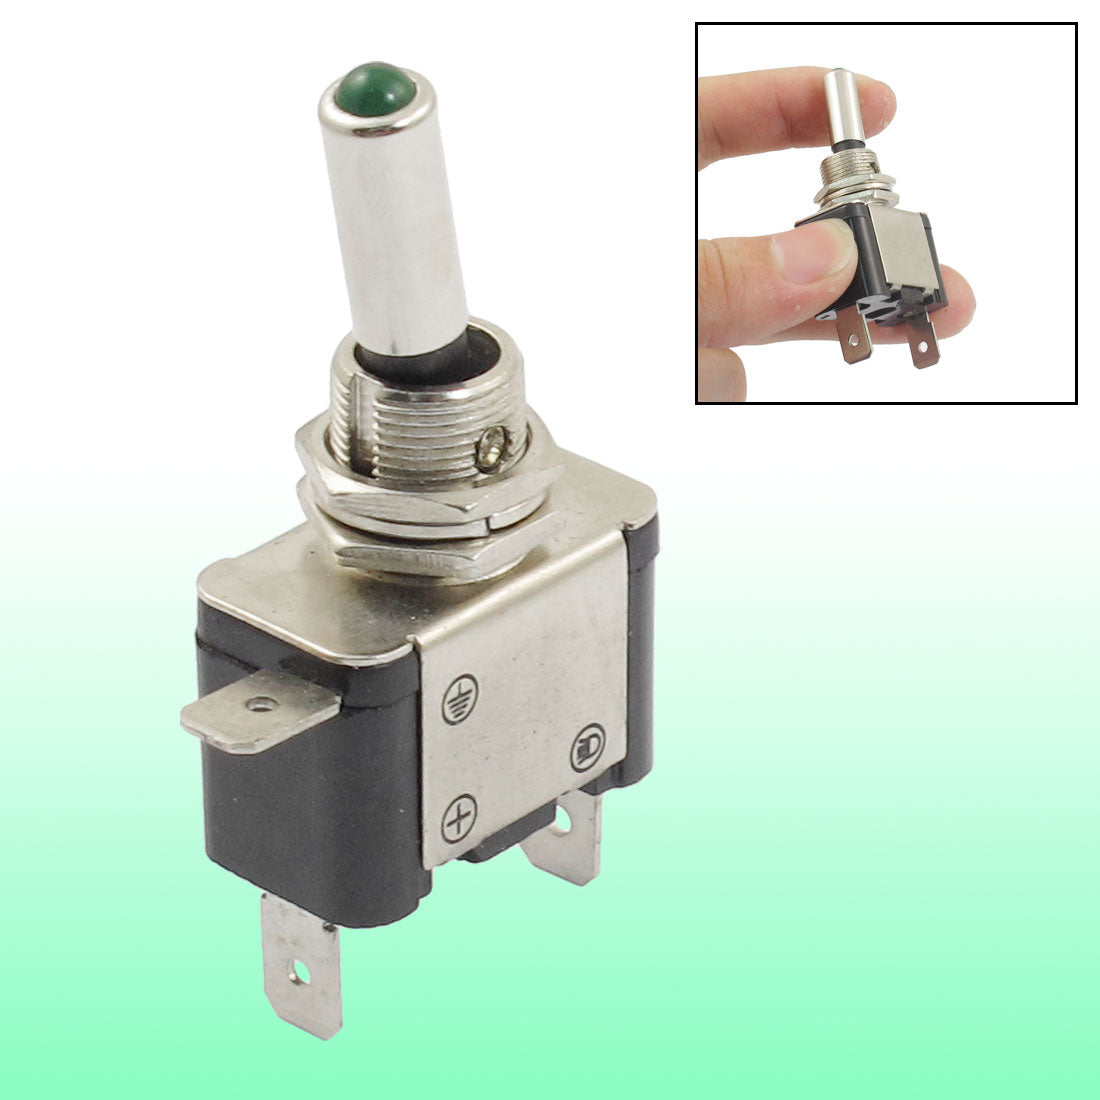 uxcell Uxcell DC 12V 20A 3 Terminal SPST ON/OFF Green LED Light Latching Toggle Switch ASW-17D